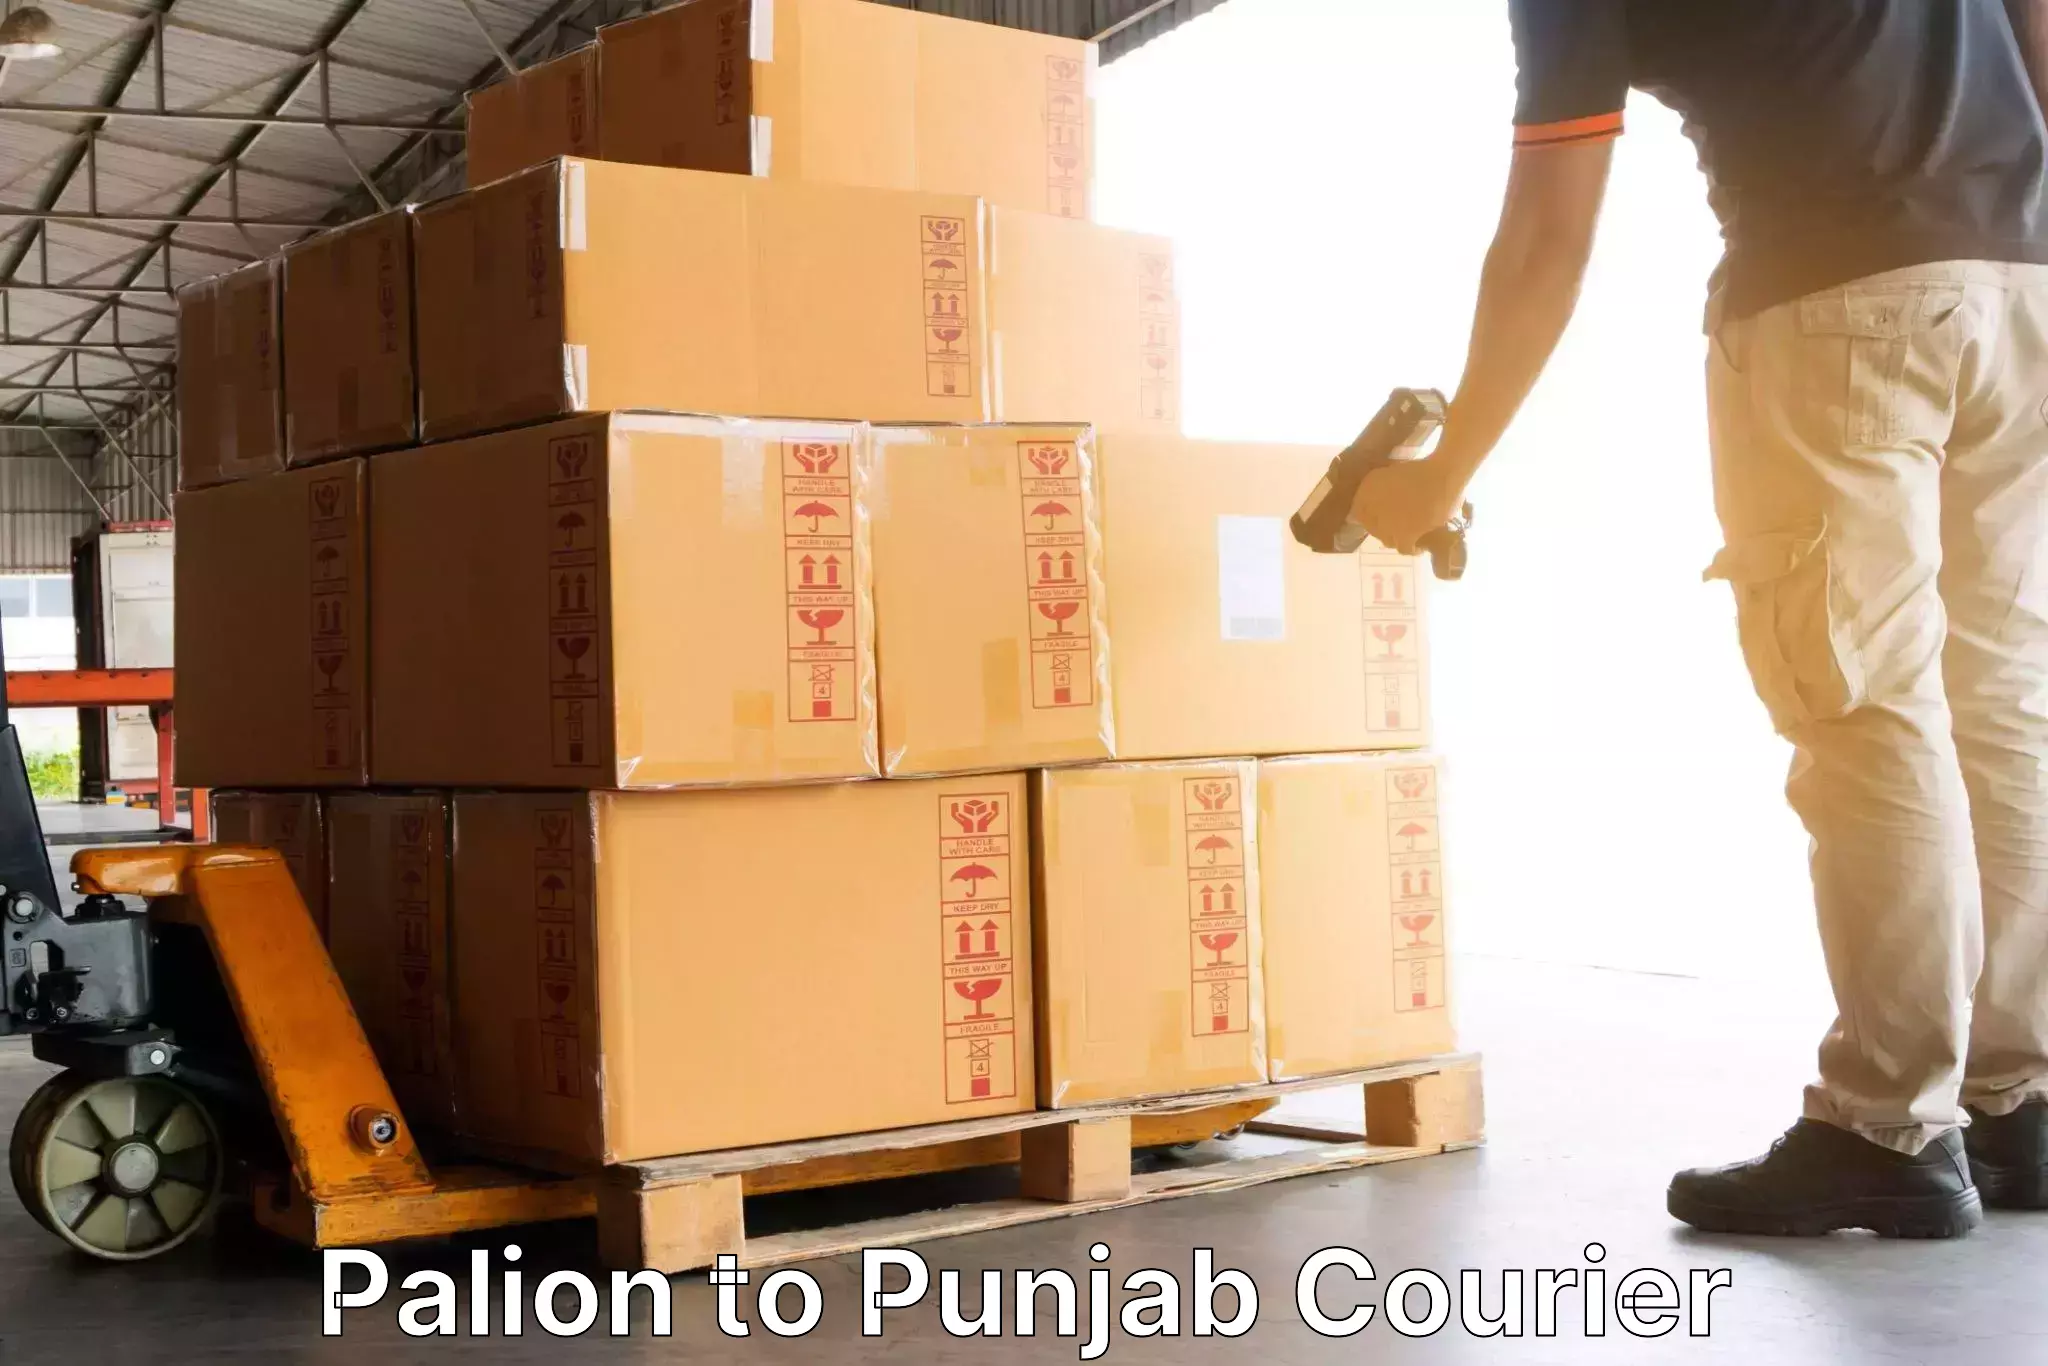 Express delivery network Palion to Bathinda